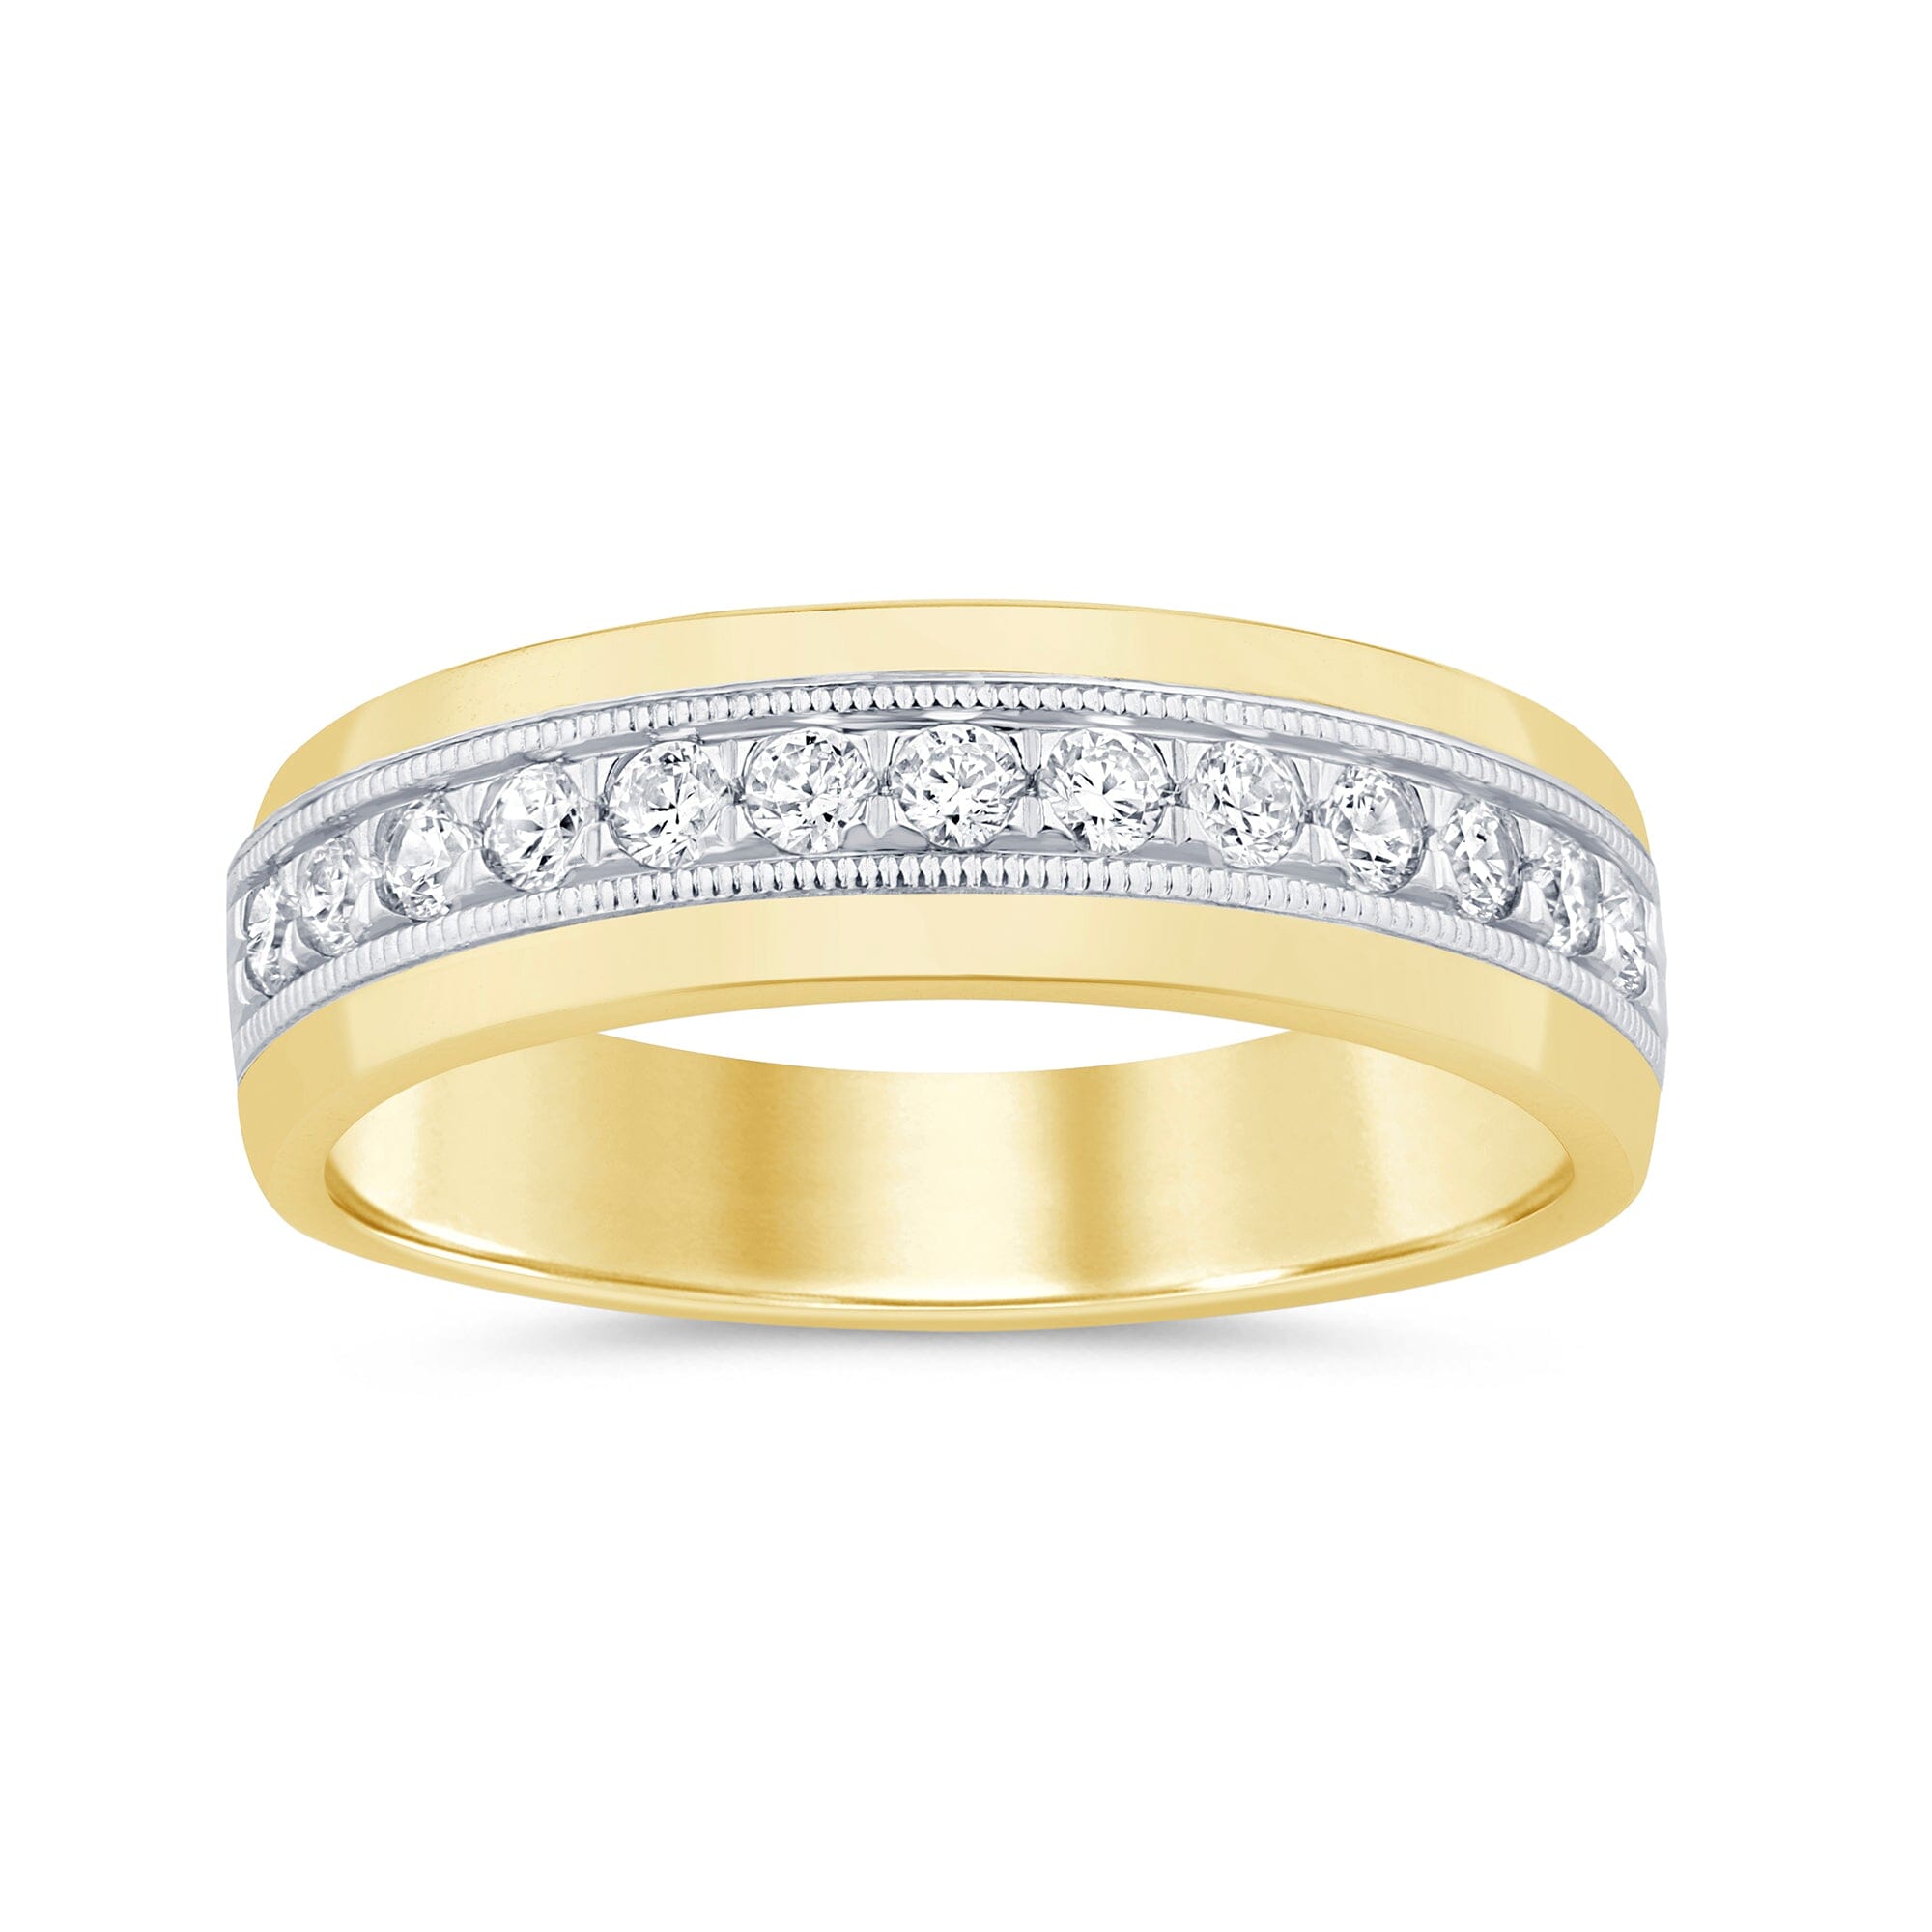 Meera Channel Ring with 1/2ct of Laboratory Grown Diamonds in 9ct Yellow Gold and 9ct White Gold Rings Bevilles 